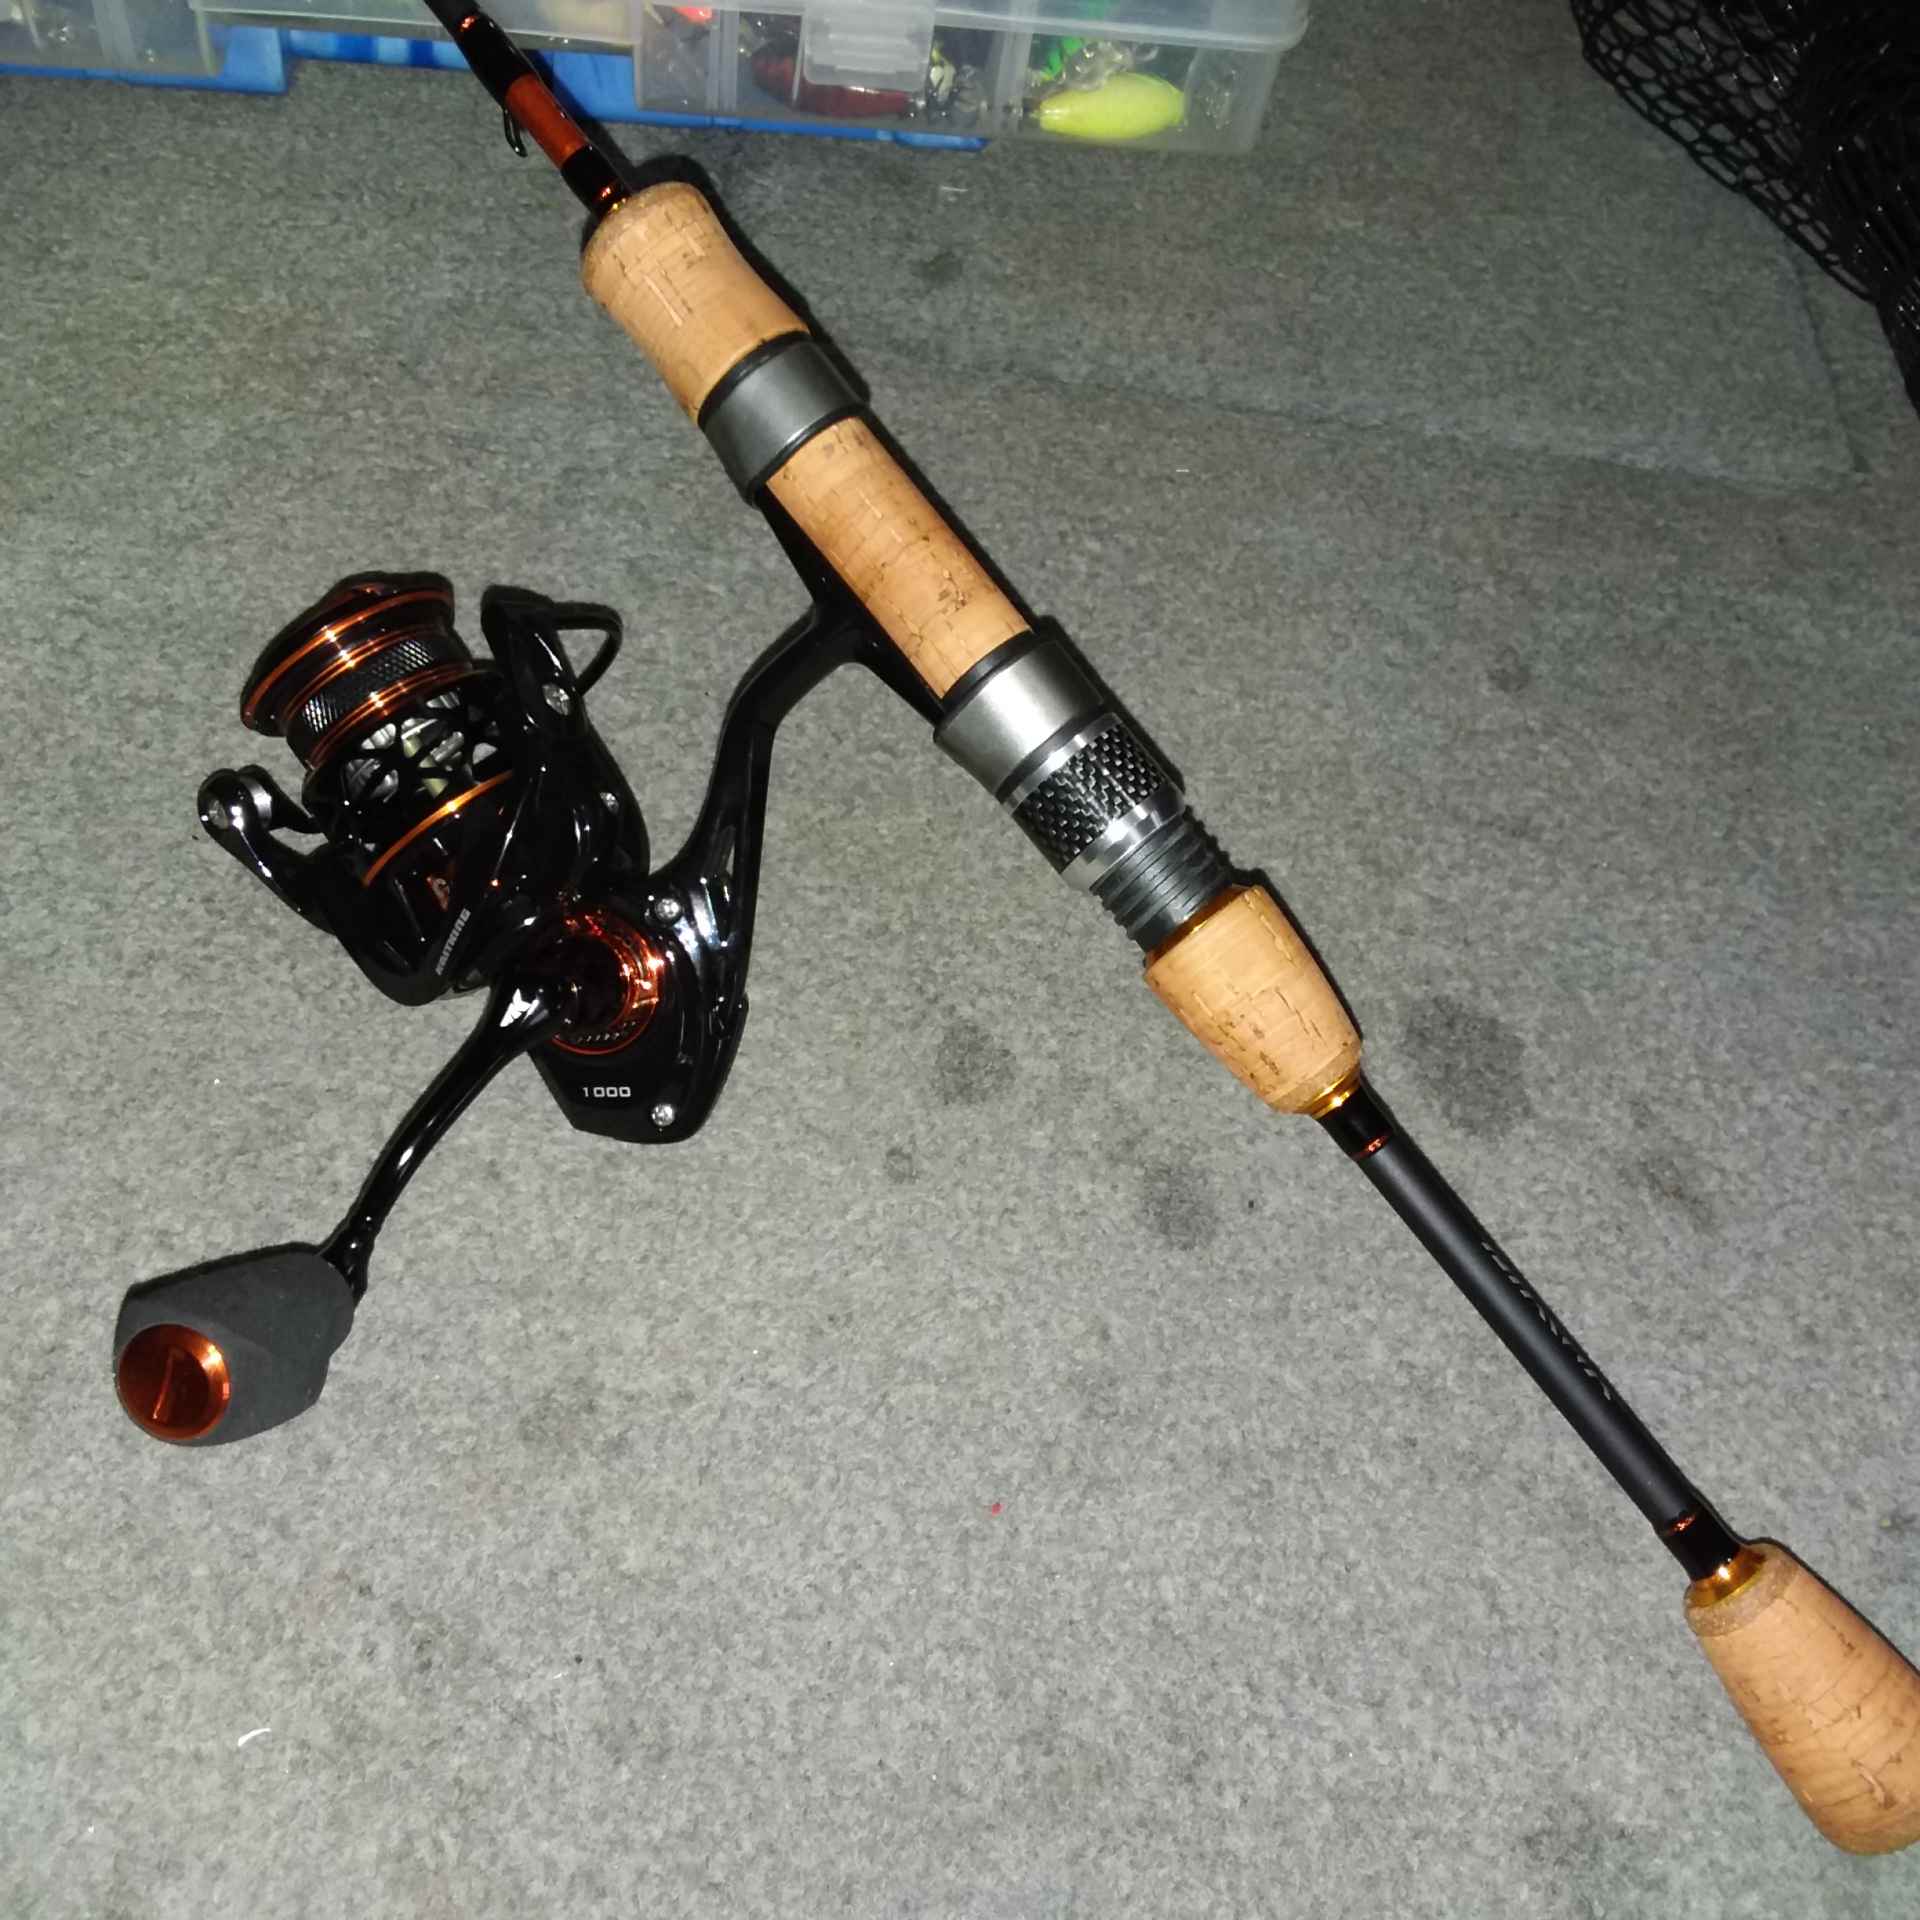 KastKing Zephyr 1000 SFS Spinning Reel, First Impression Review